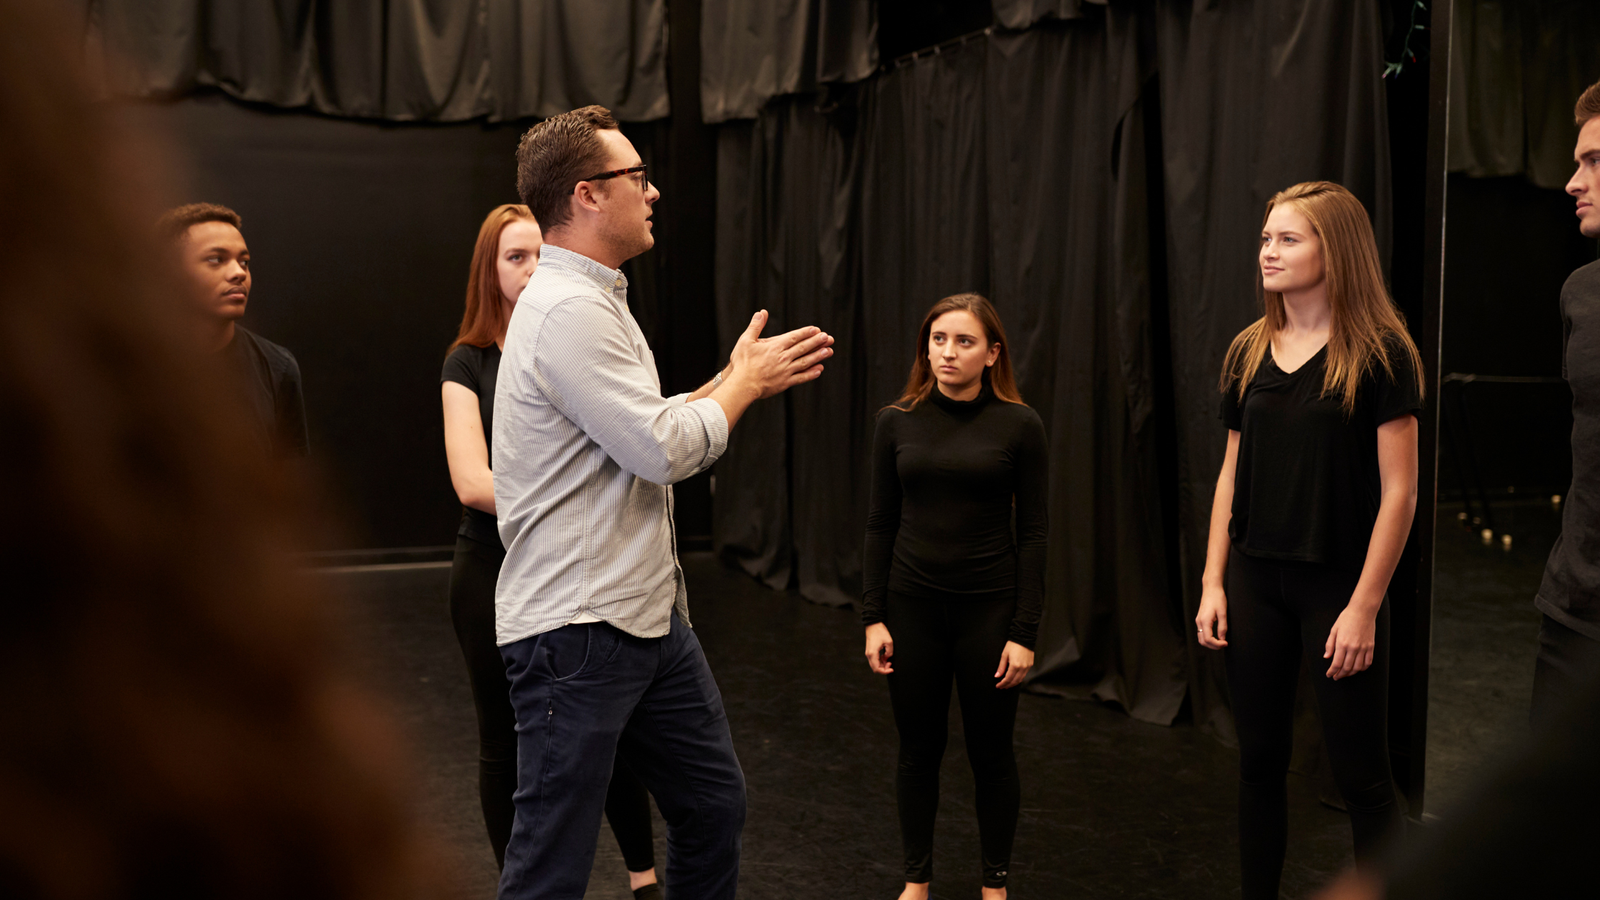 What are the long-term career prospects for graduates of acting academies in Sydney